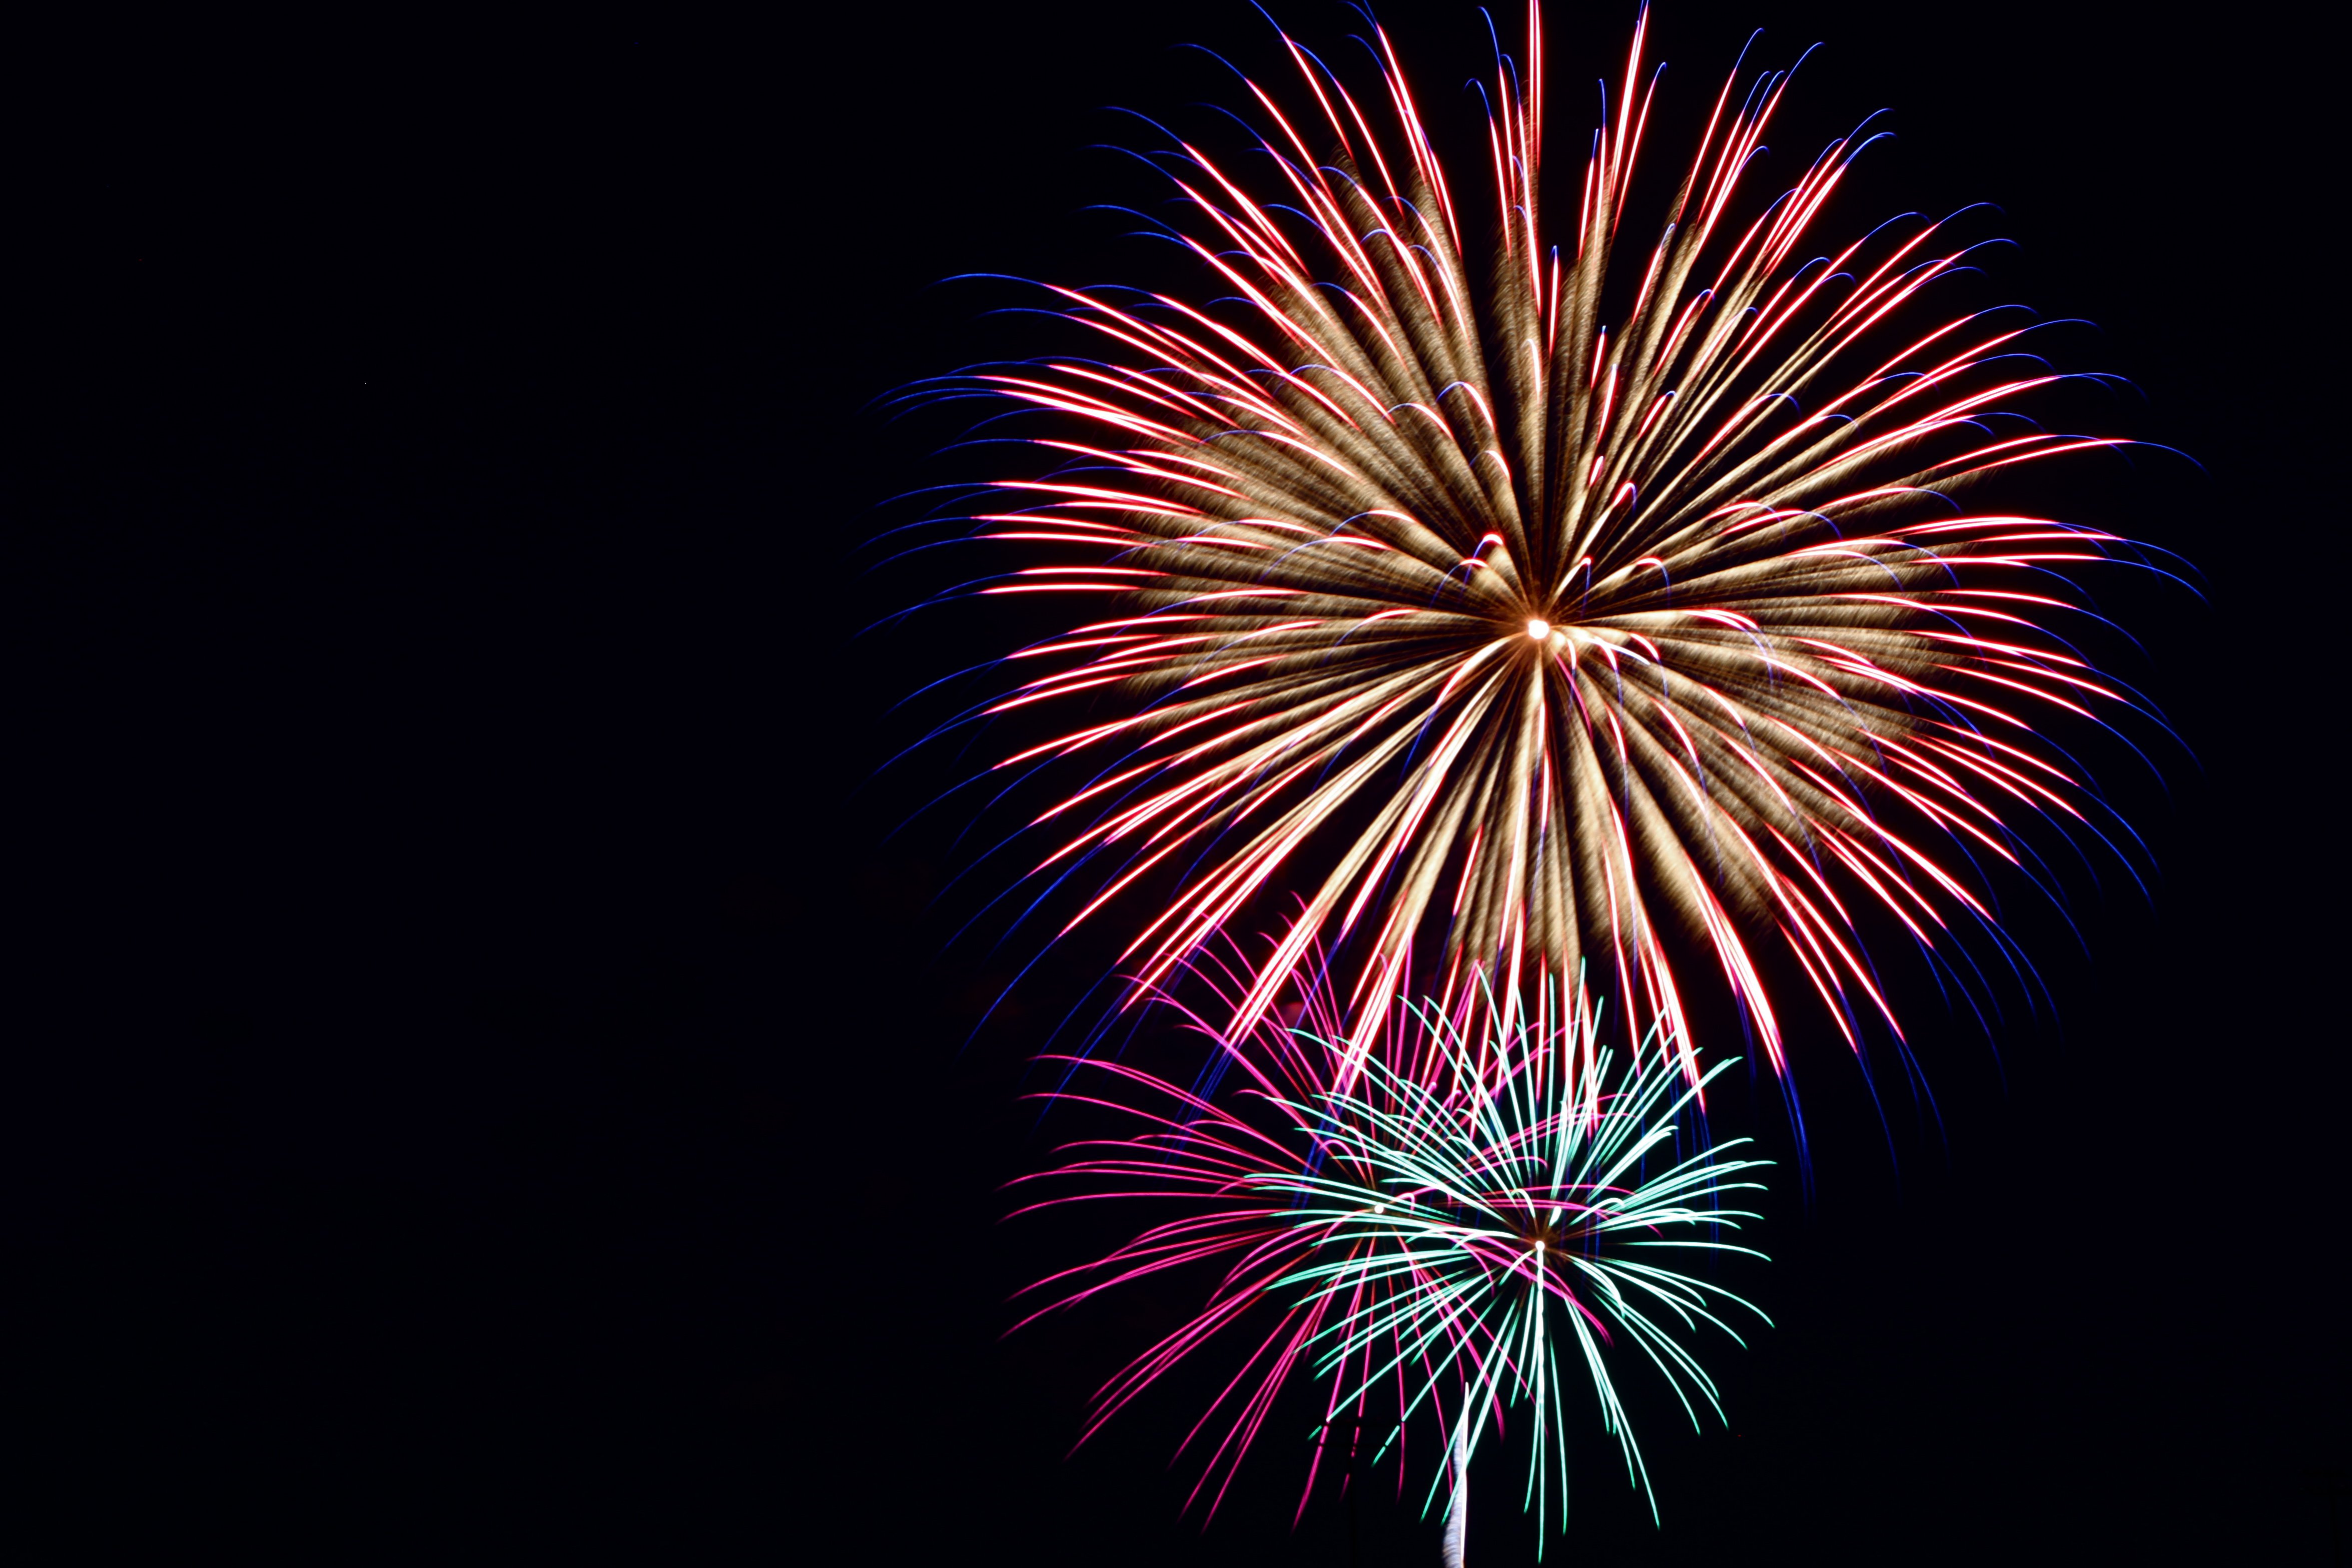 HD Wallpaper Of Fireworks To Celebrate The New Year